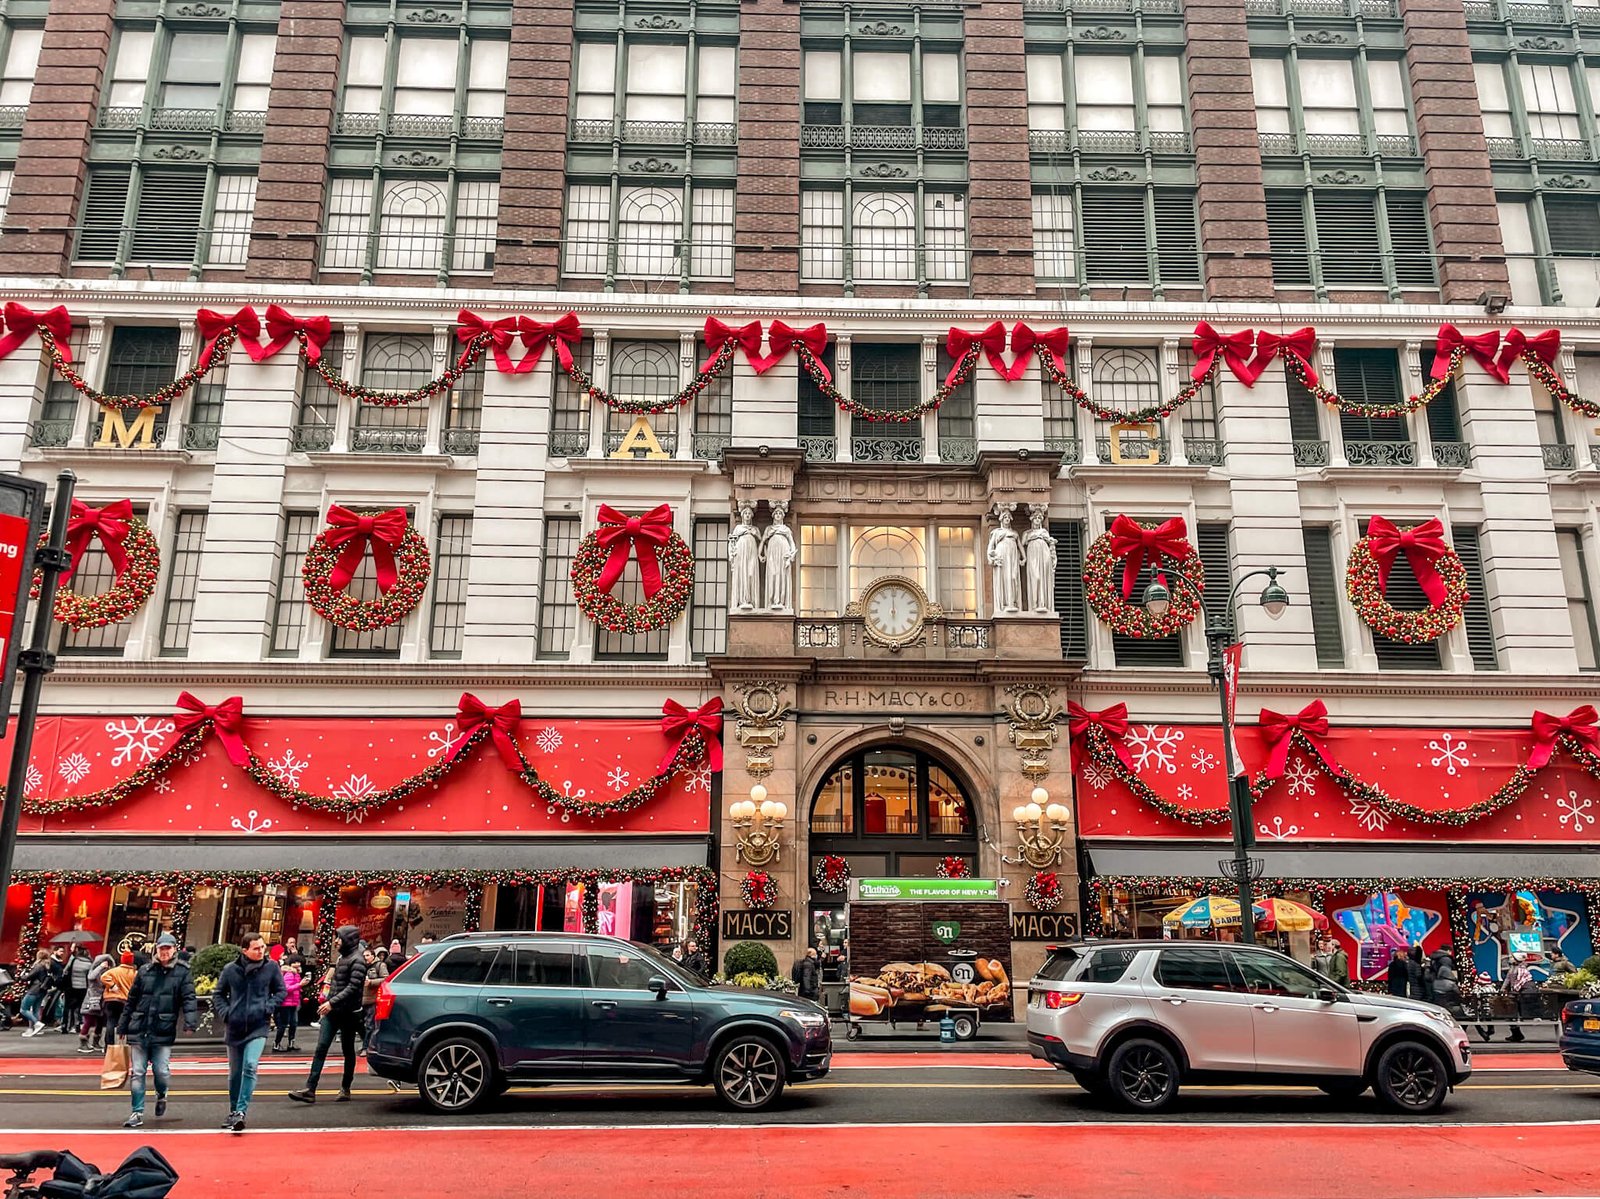 Macy's window displays, things to do in December in New York